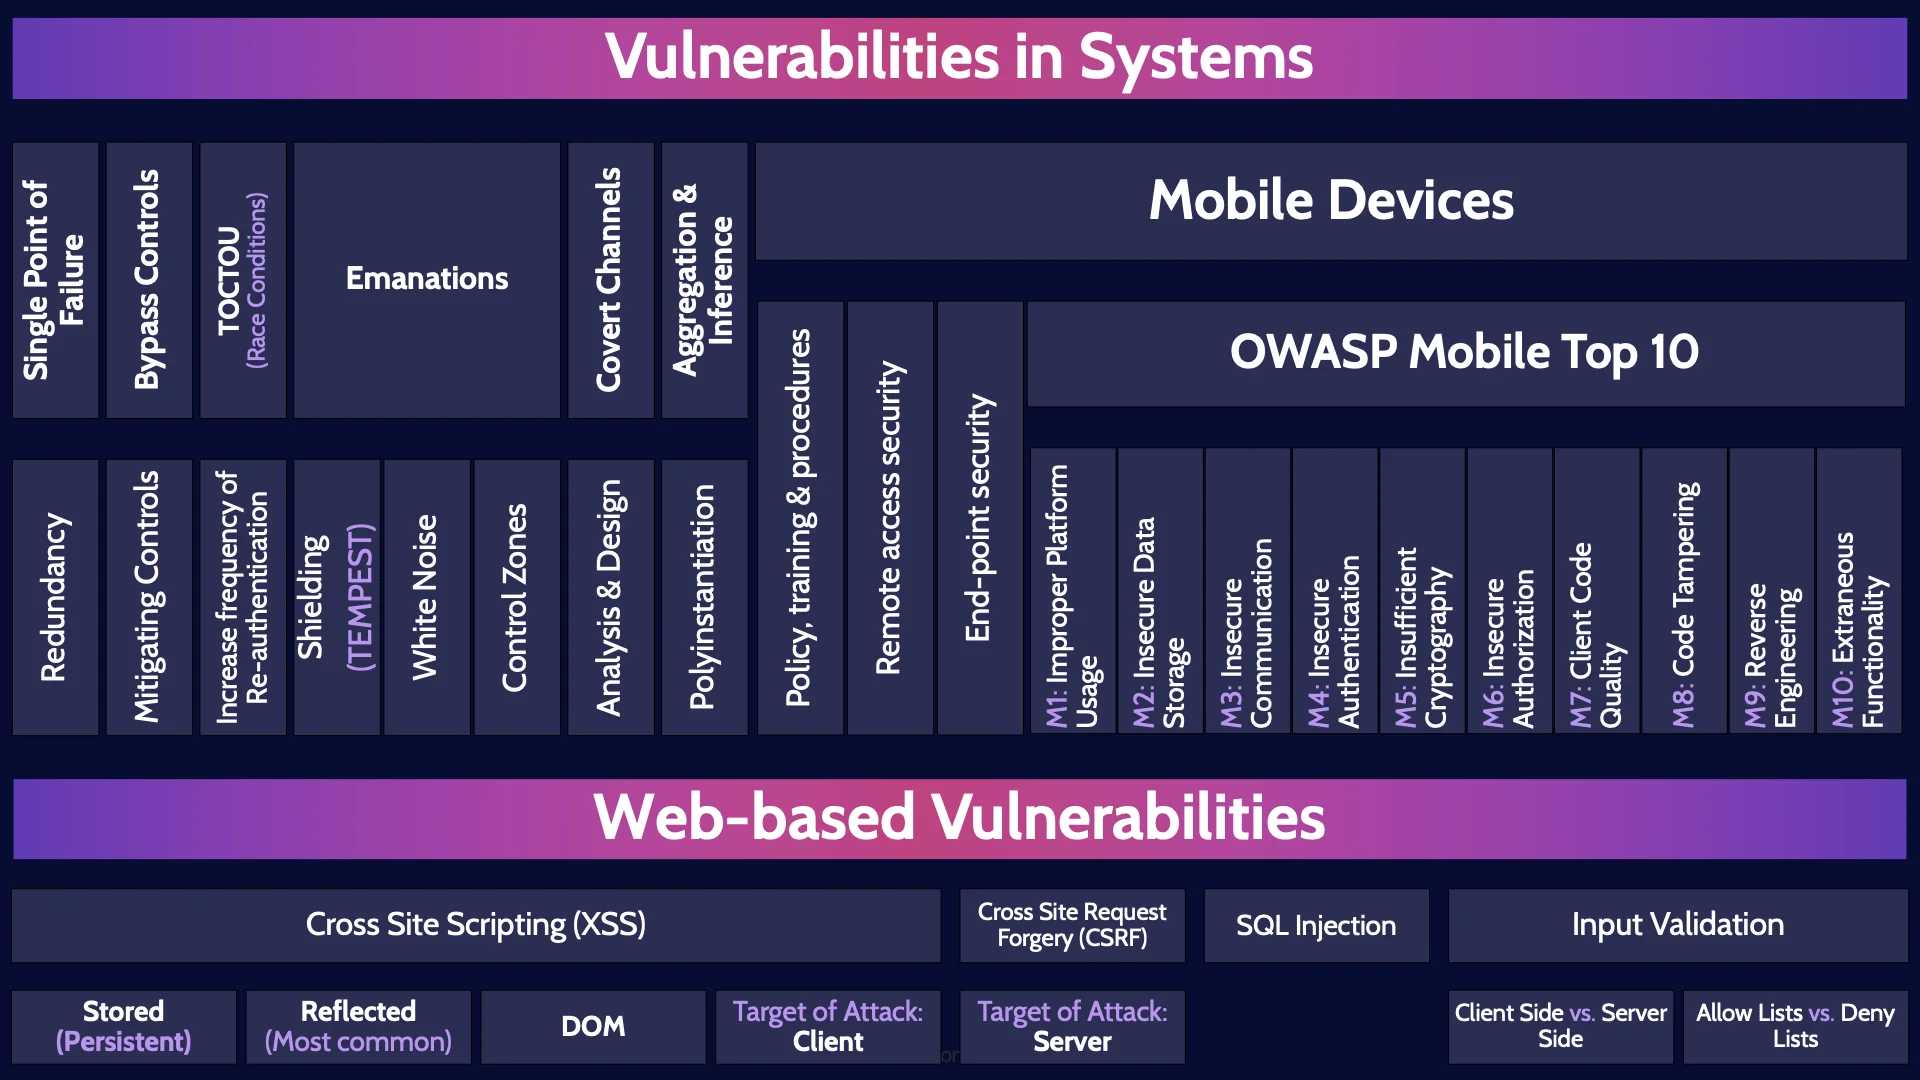 Image of vulnerabilities in systems - Destination Certification